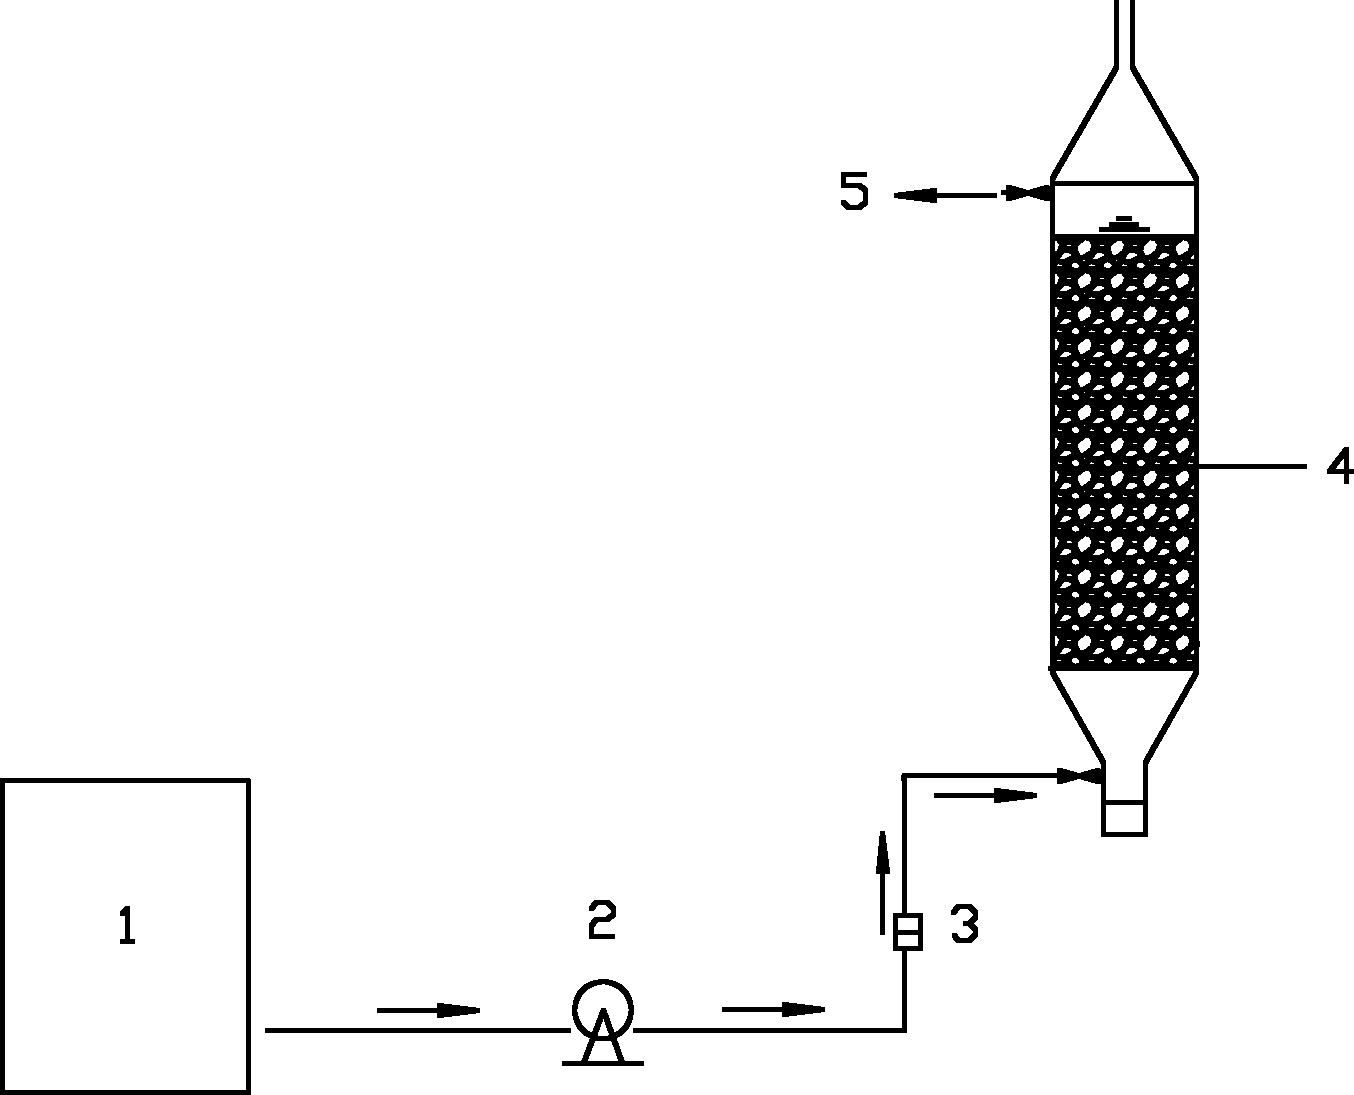 Nitrogen and phosphorus removal method by using pyrite as biochemical filling